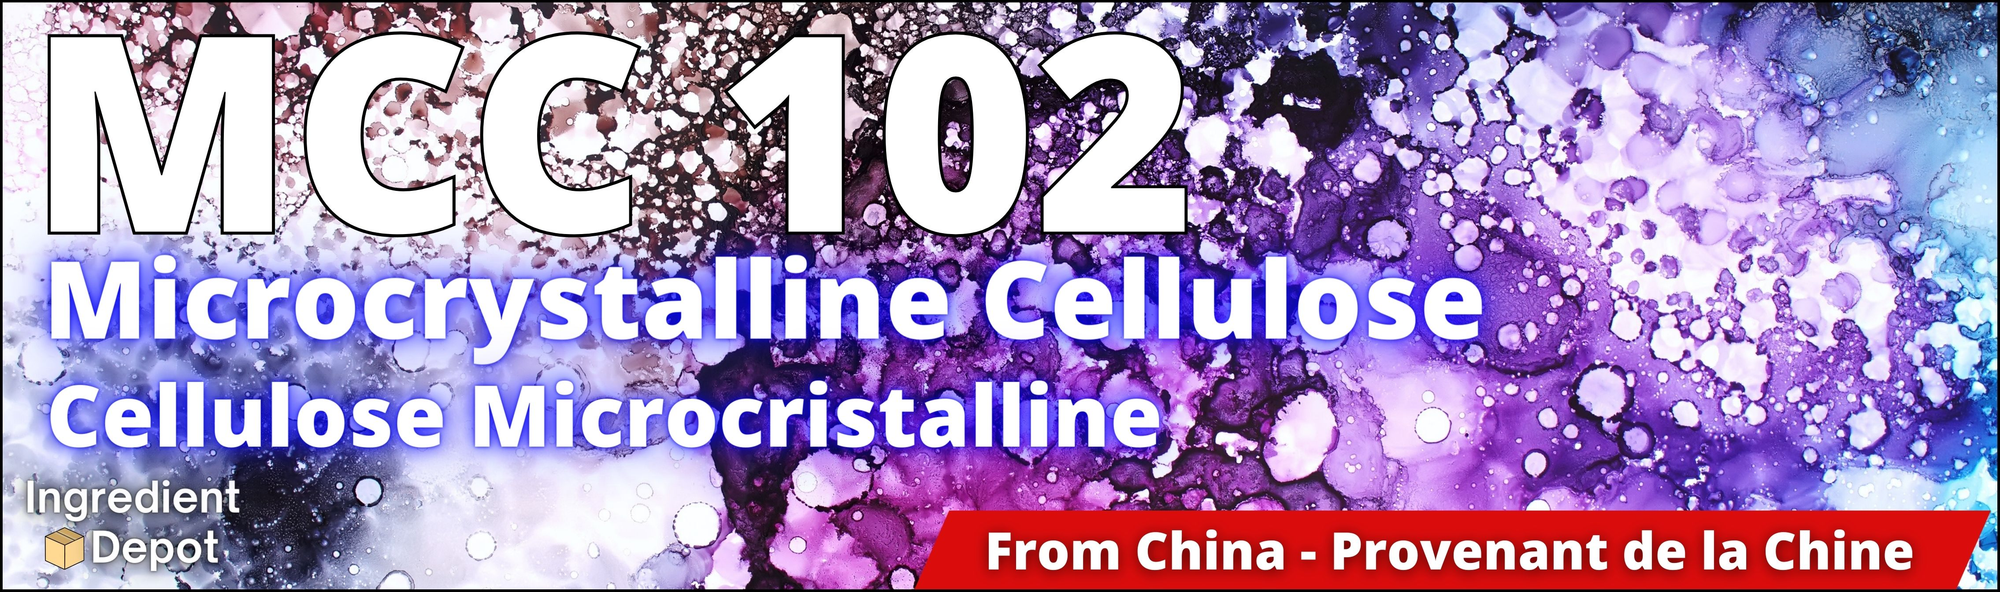 Ingredient Depot MCC 102 Microcrystalline Cellulose from China